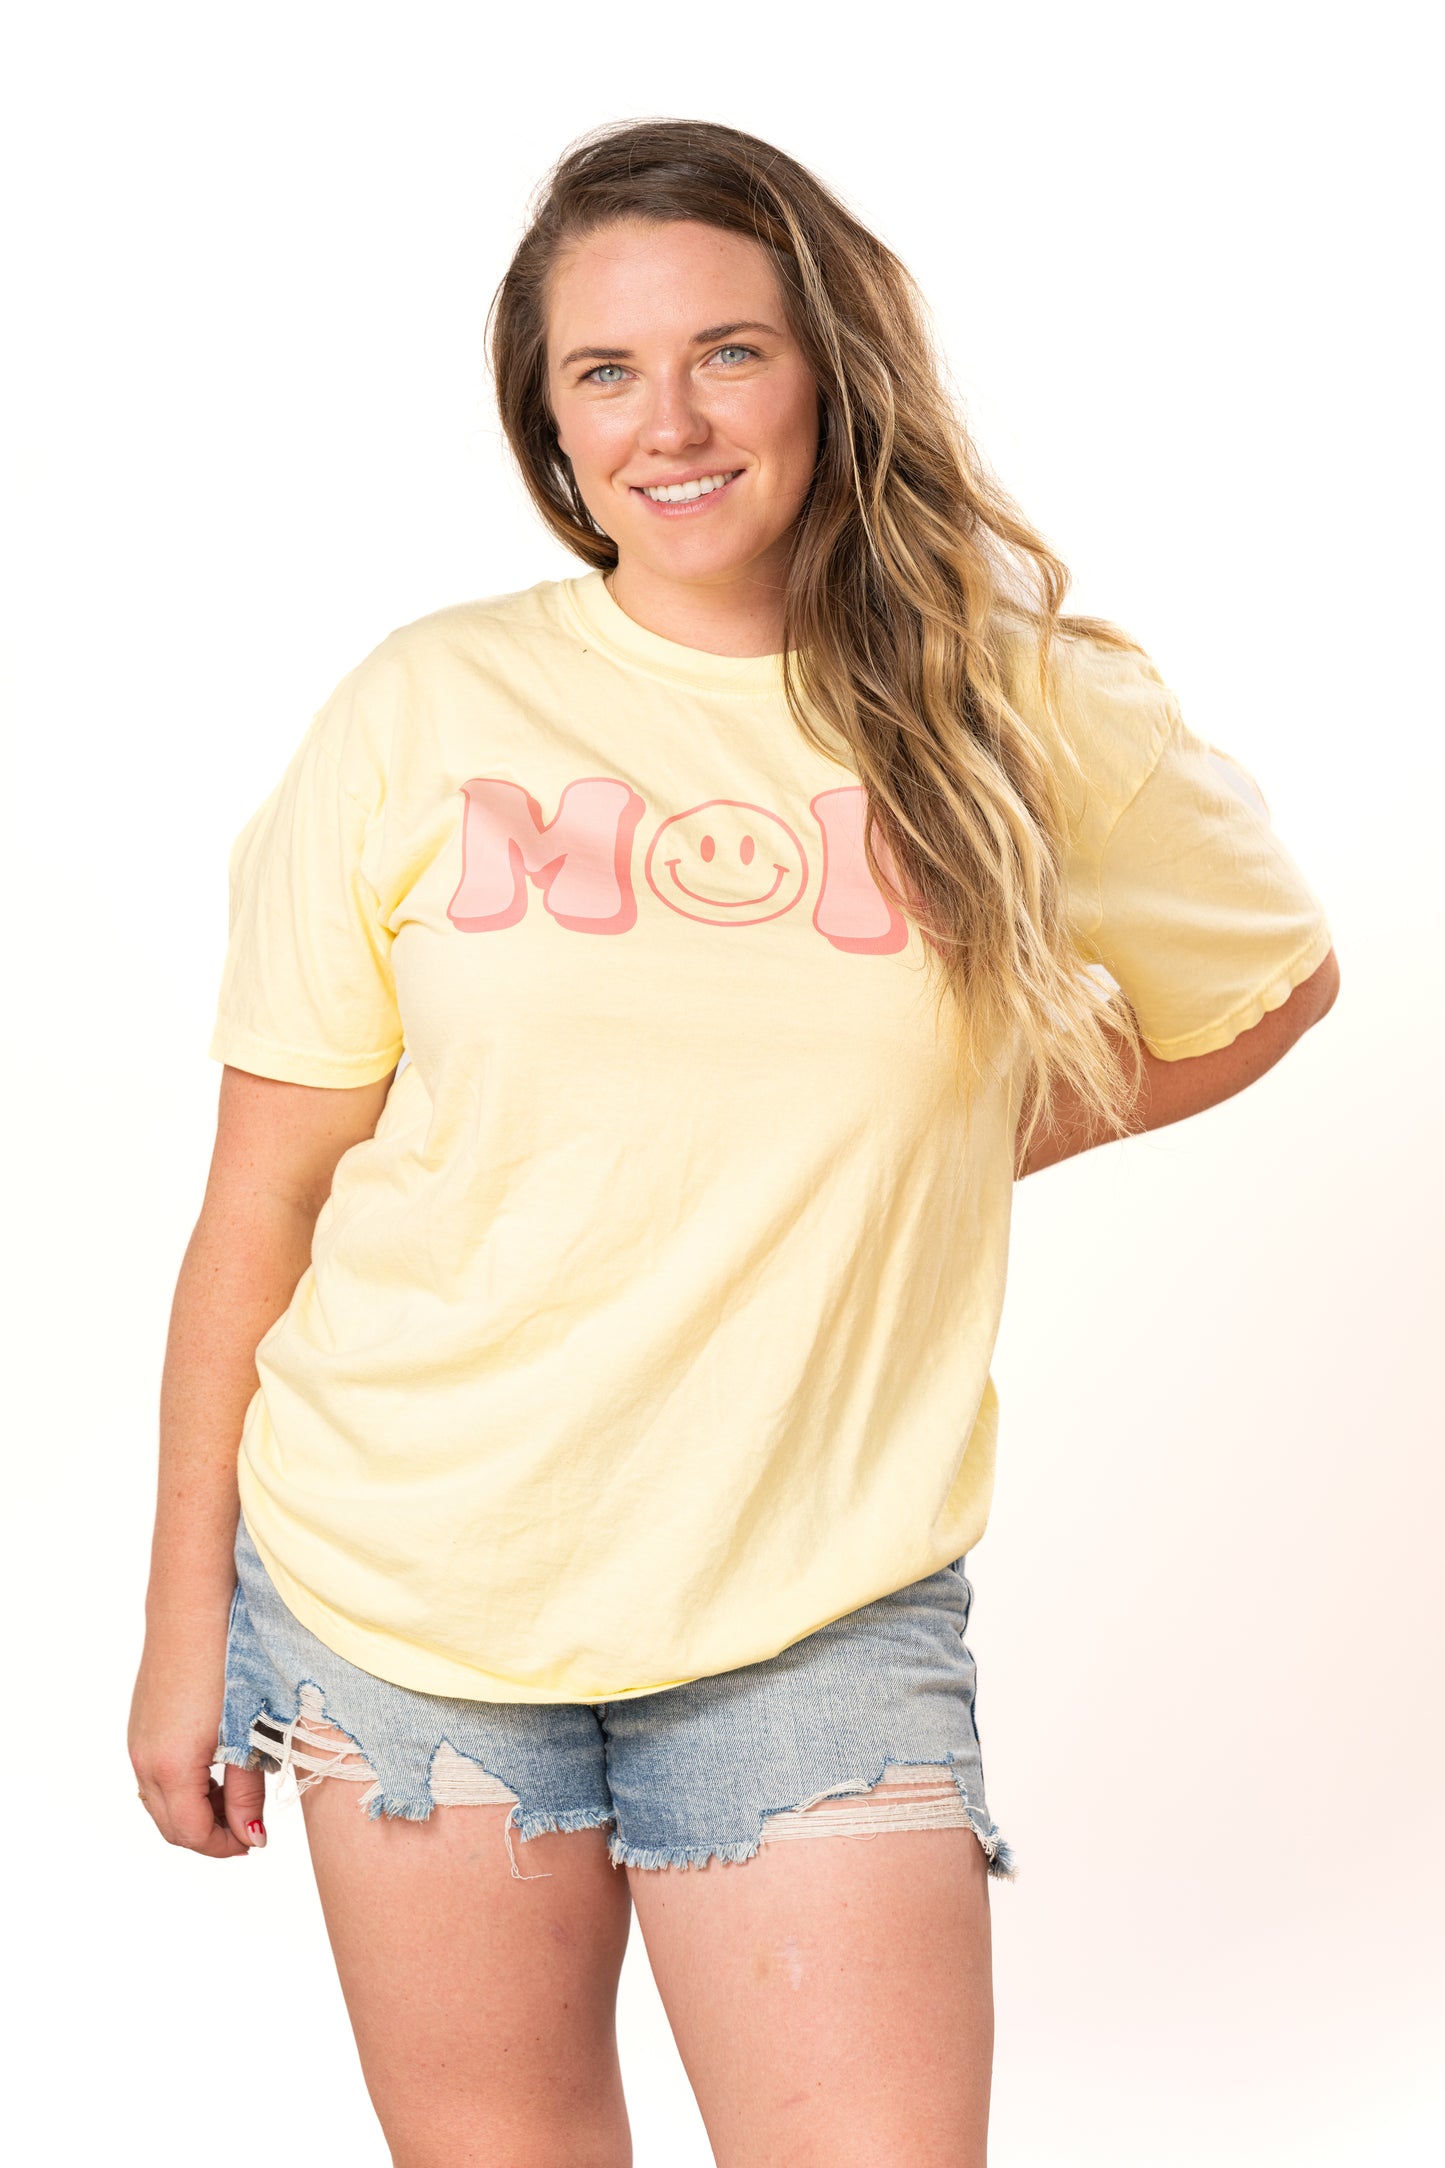 MOM Smiley (Across Front) - Tee (Pale Yellow)